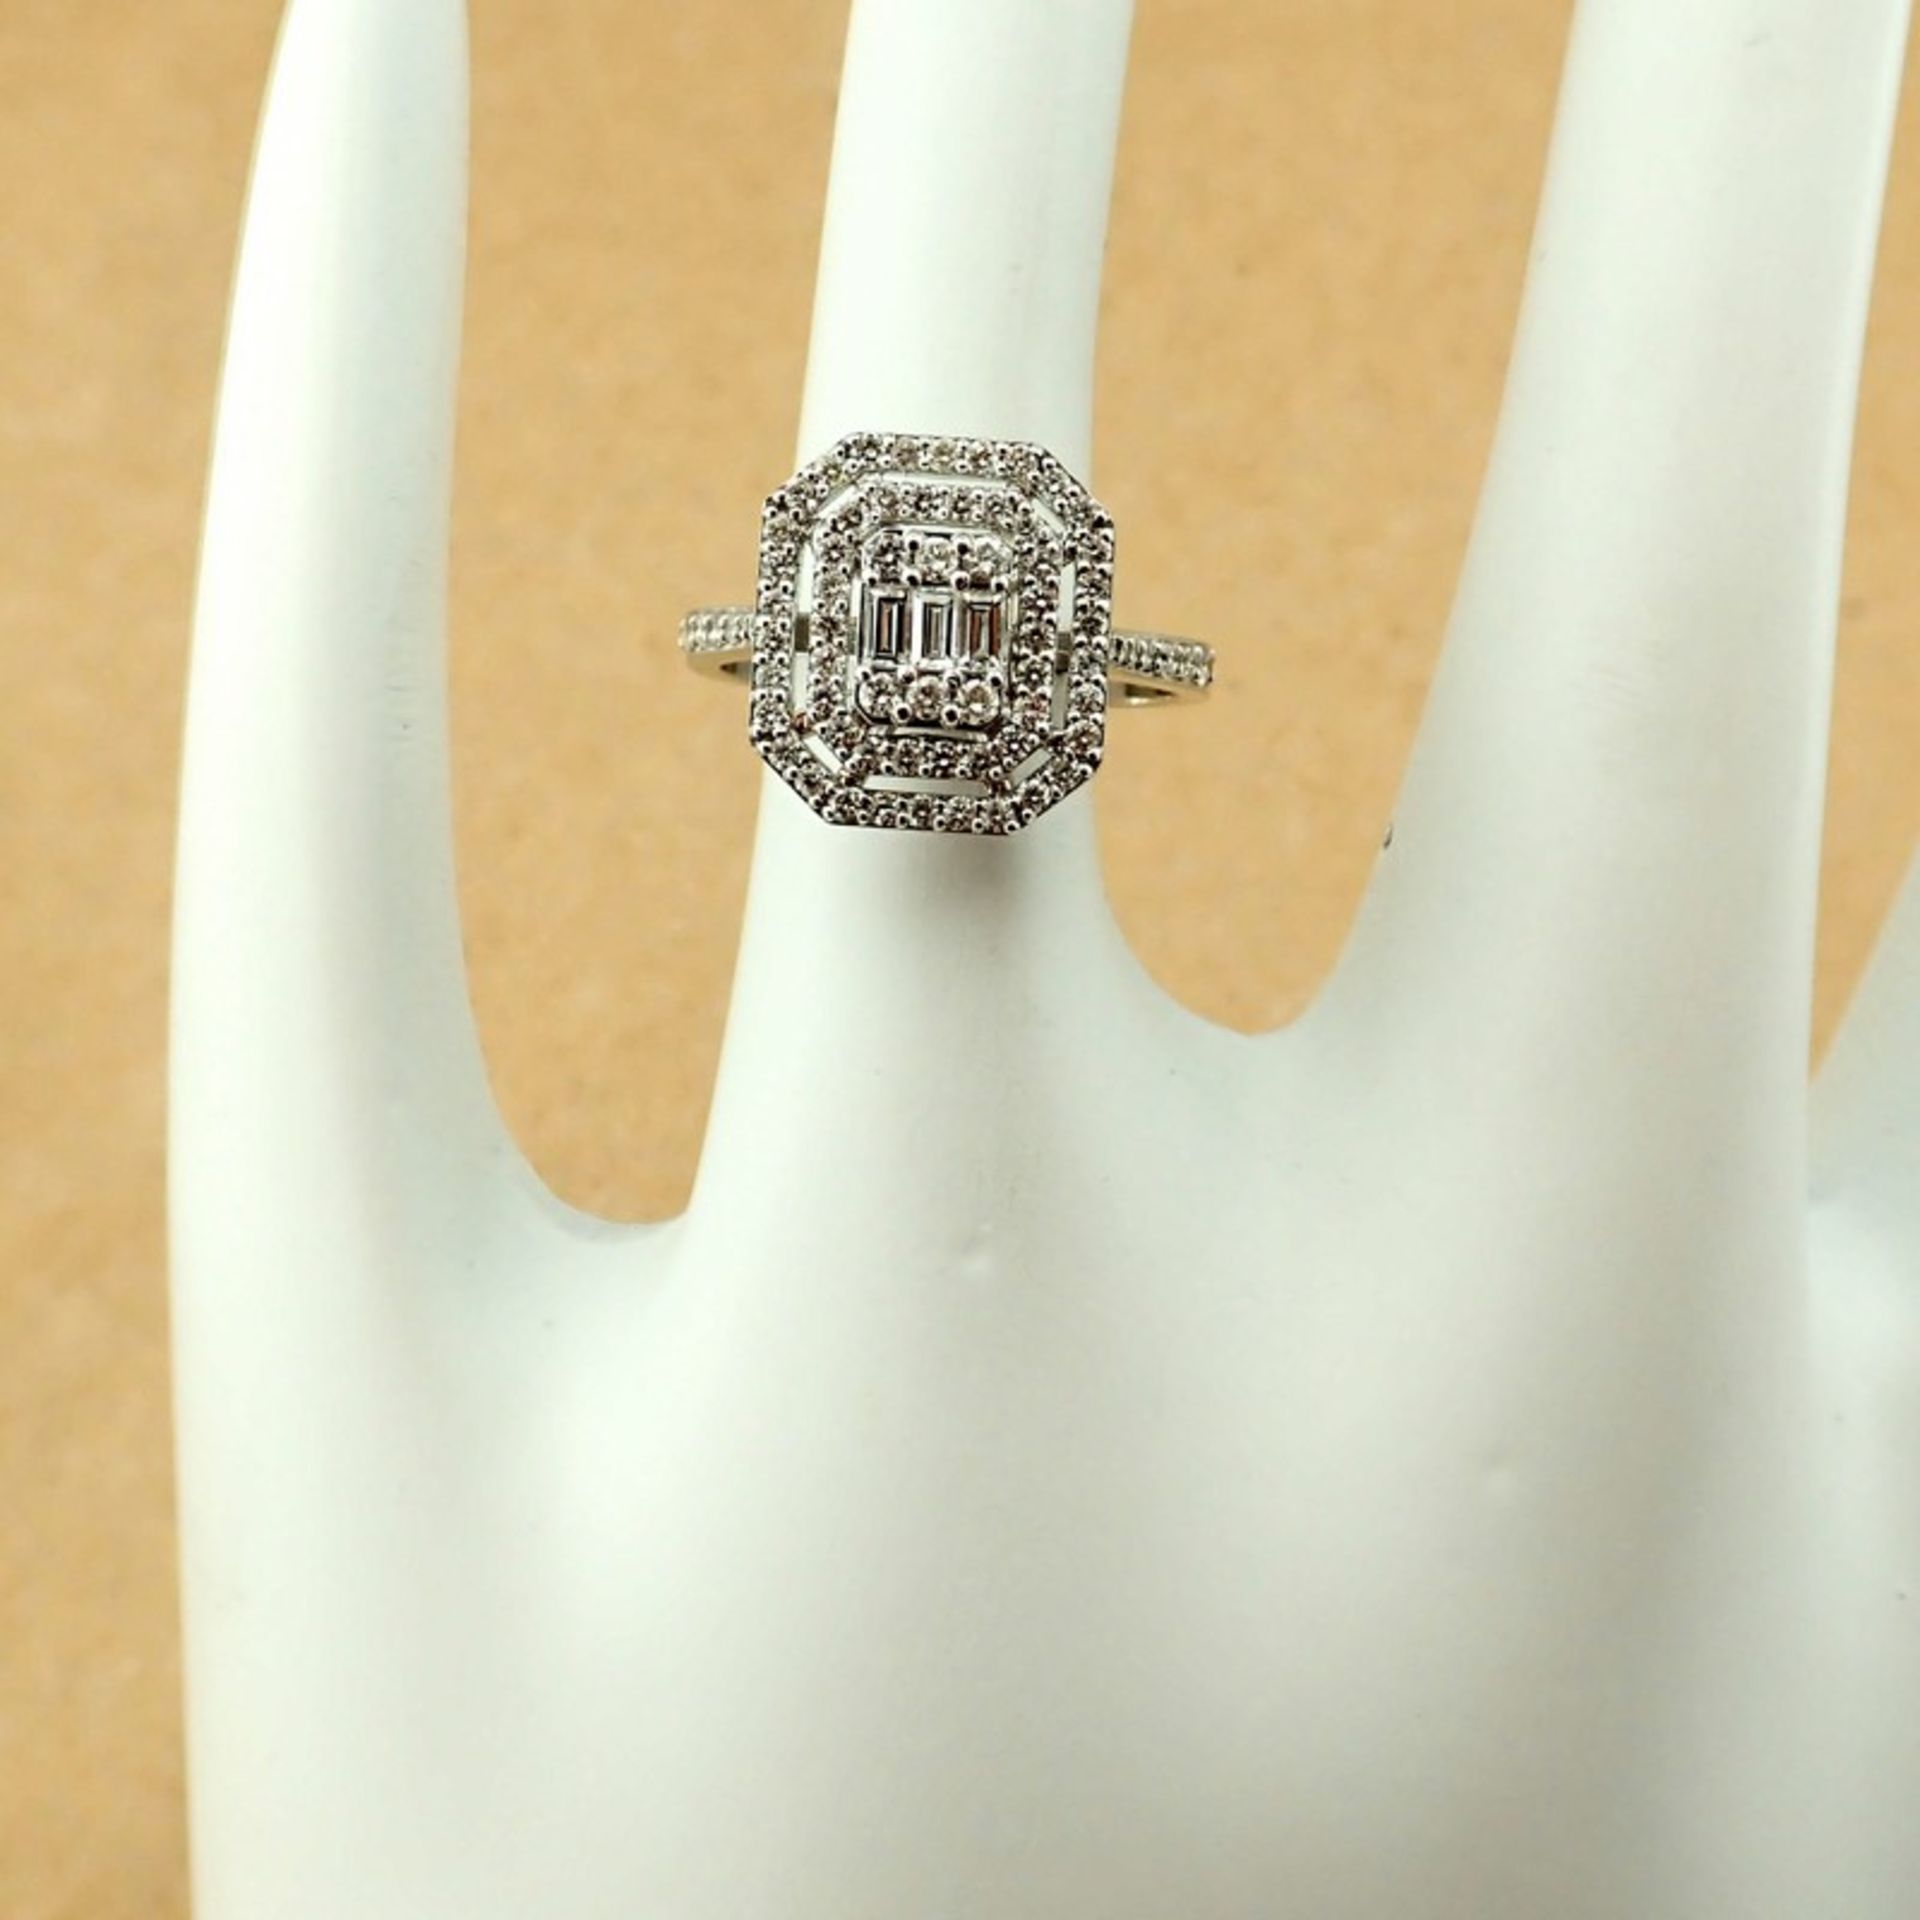 Certificated 14K White Gold Diamond Ring - Image 5 of 6